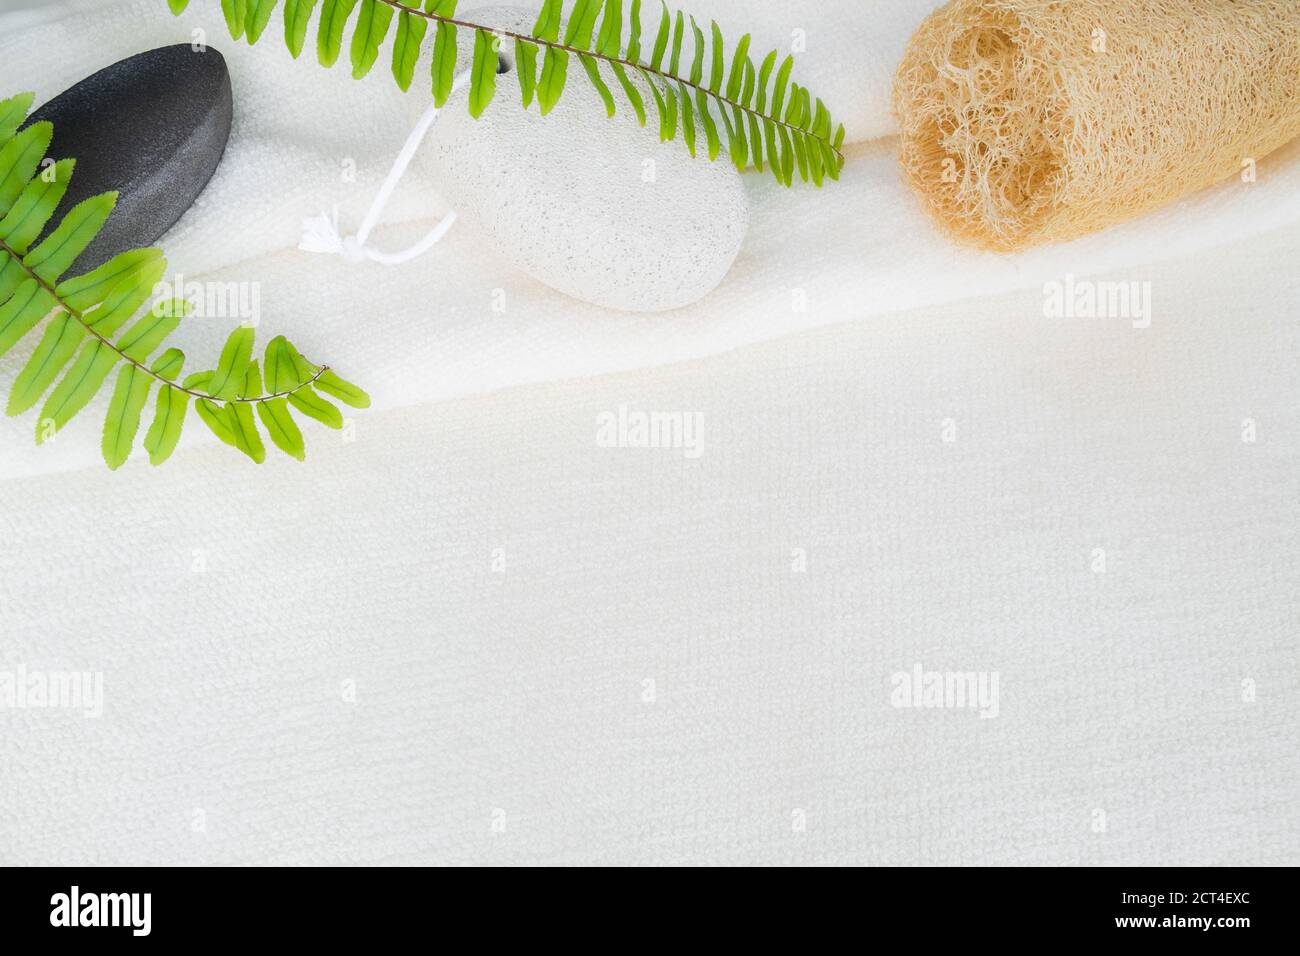 Top view flatlay soft white towel background for organic natural body and foot scrub exfoliating cleaning product display mockup in bathroom or spa Stock Photo